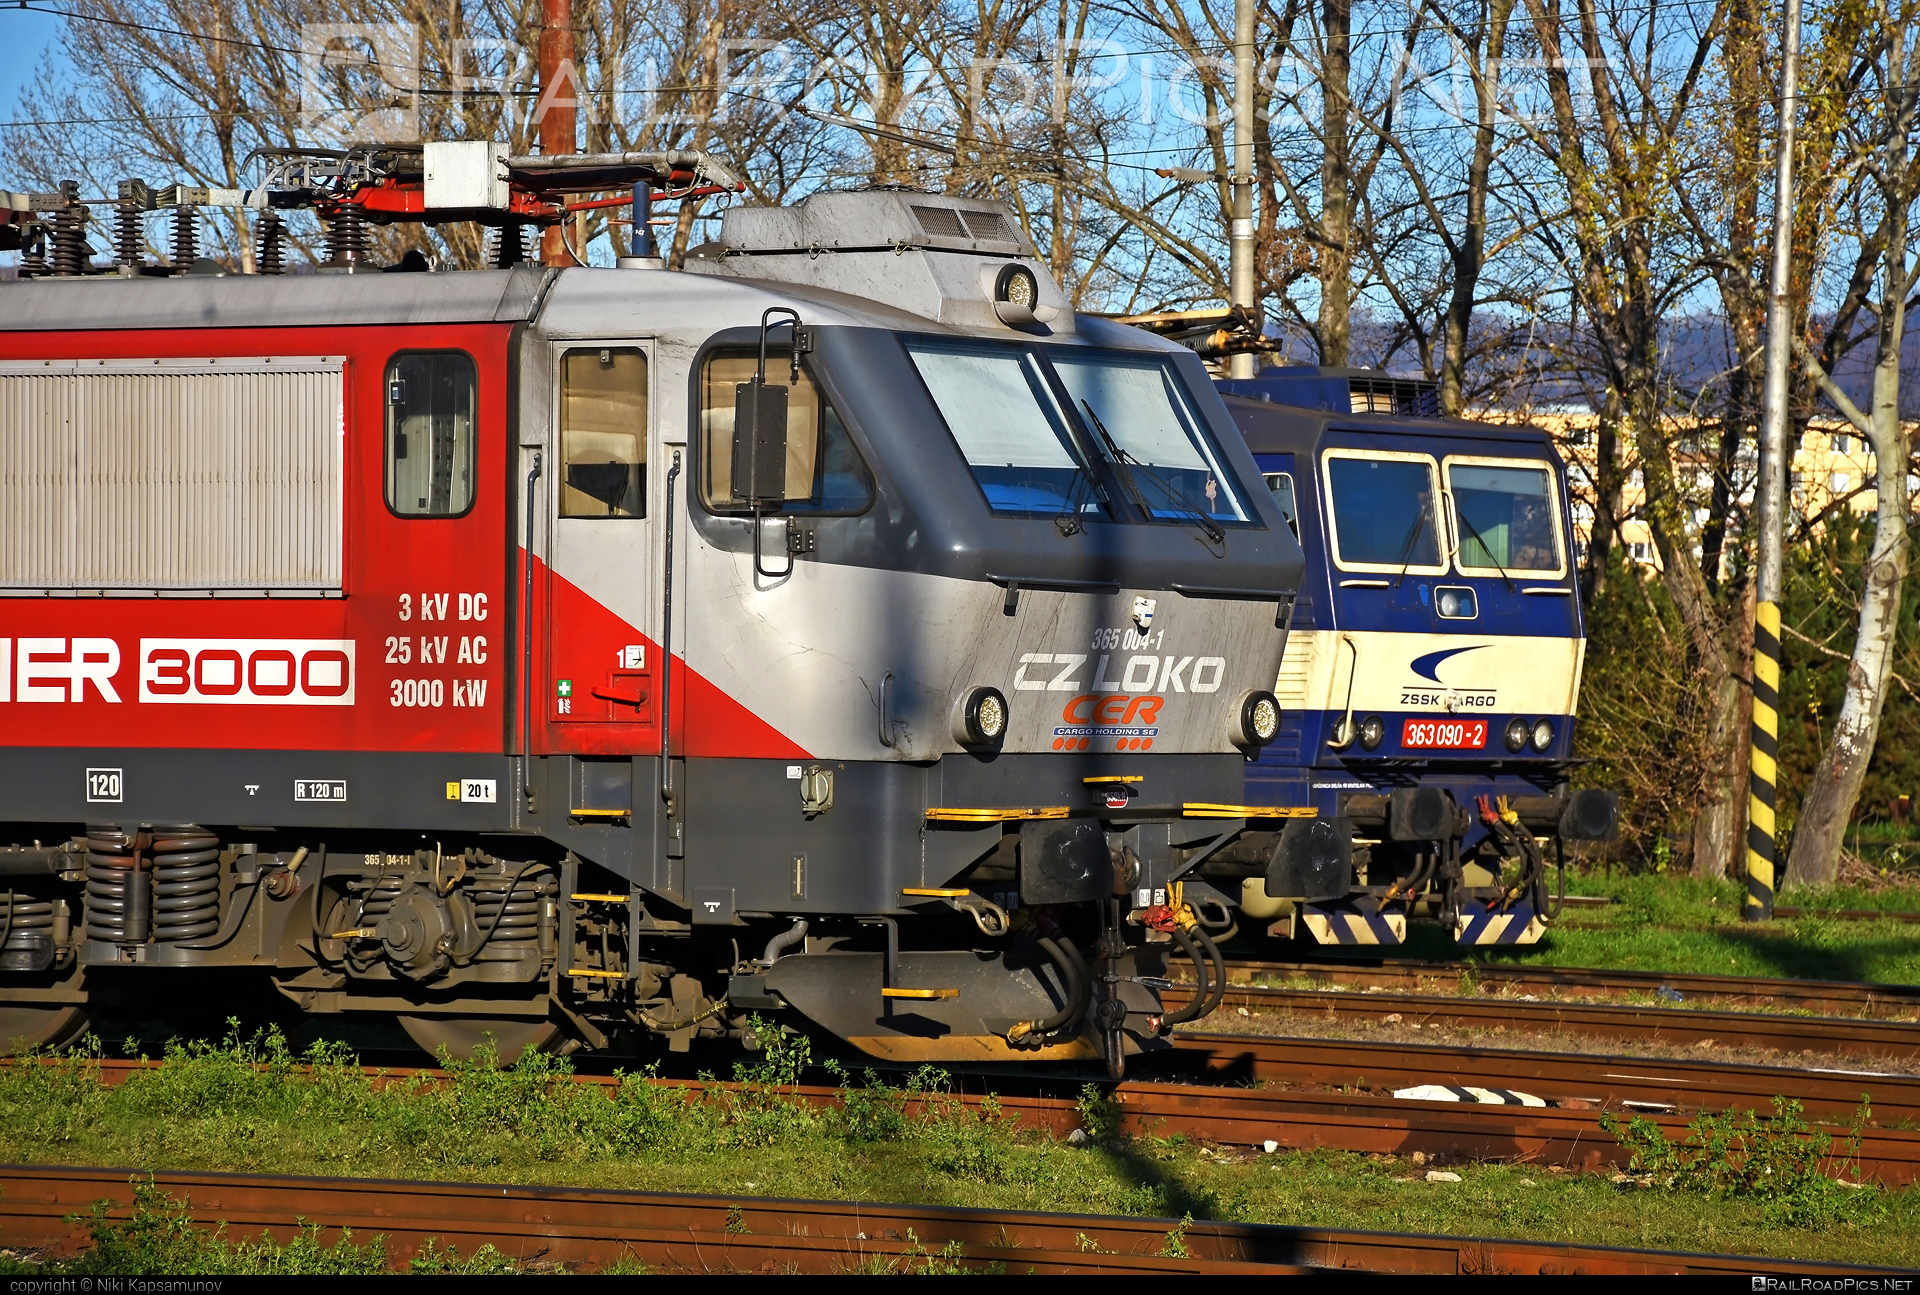 CZ LOKO EffiLiner 3000 - 365 004-1 operated by CER Slovakia a.s. #belgicanka #cer #cersk #cerslovakia #cerslovakiaas #czloko #czlokoas #effiliner #effiliner3000 #sncb12 #sncbclass12